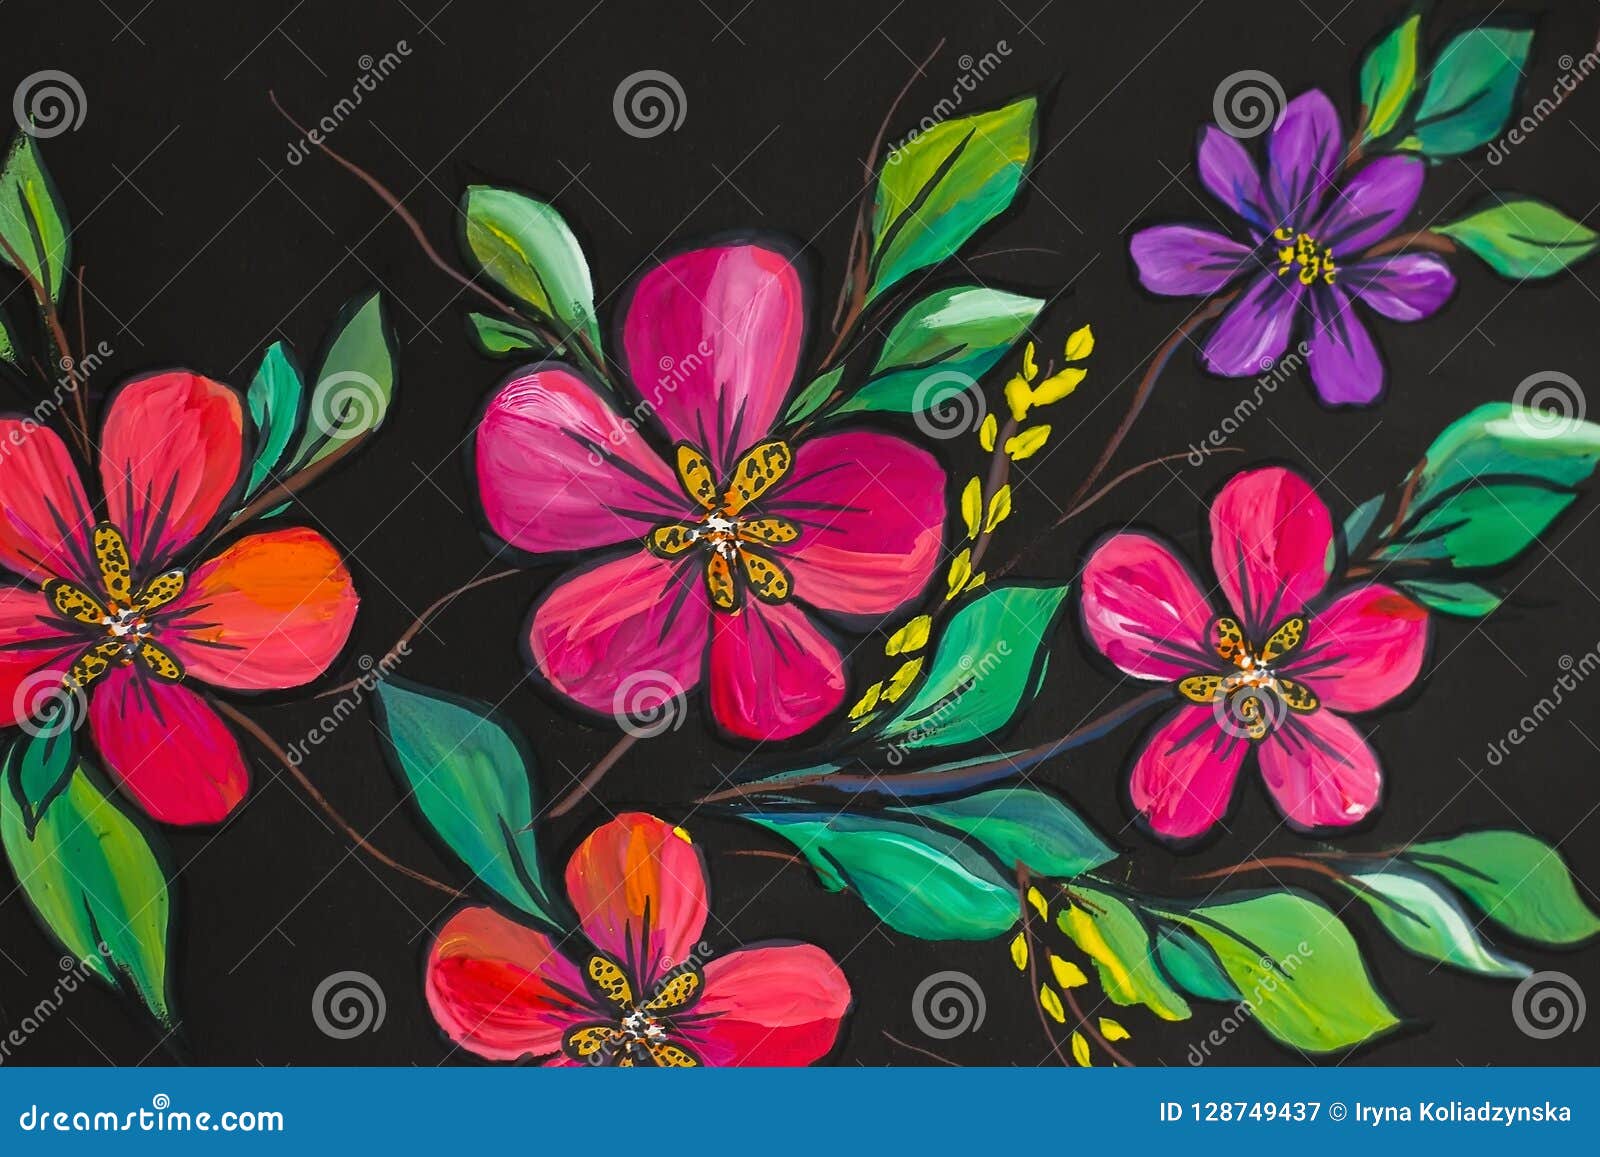 Flowers Illustration on a Black Background. Oil Painting ...